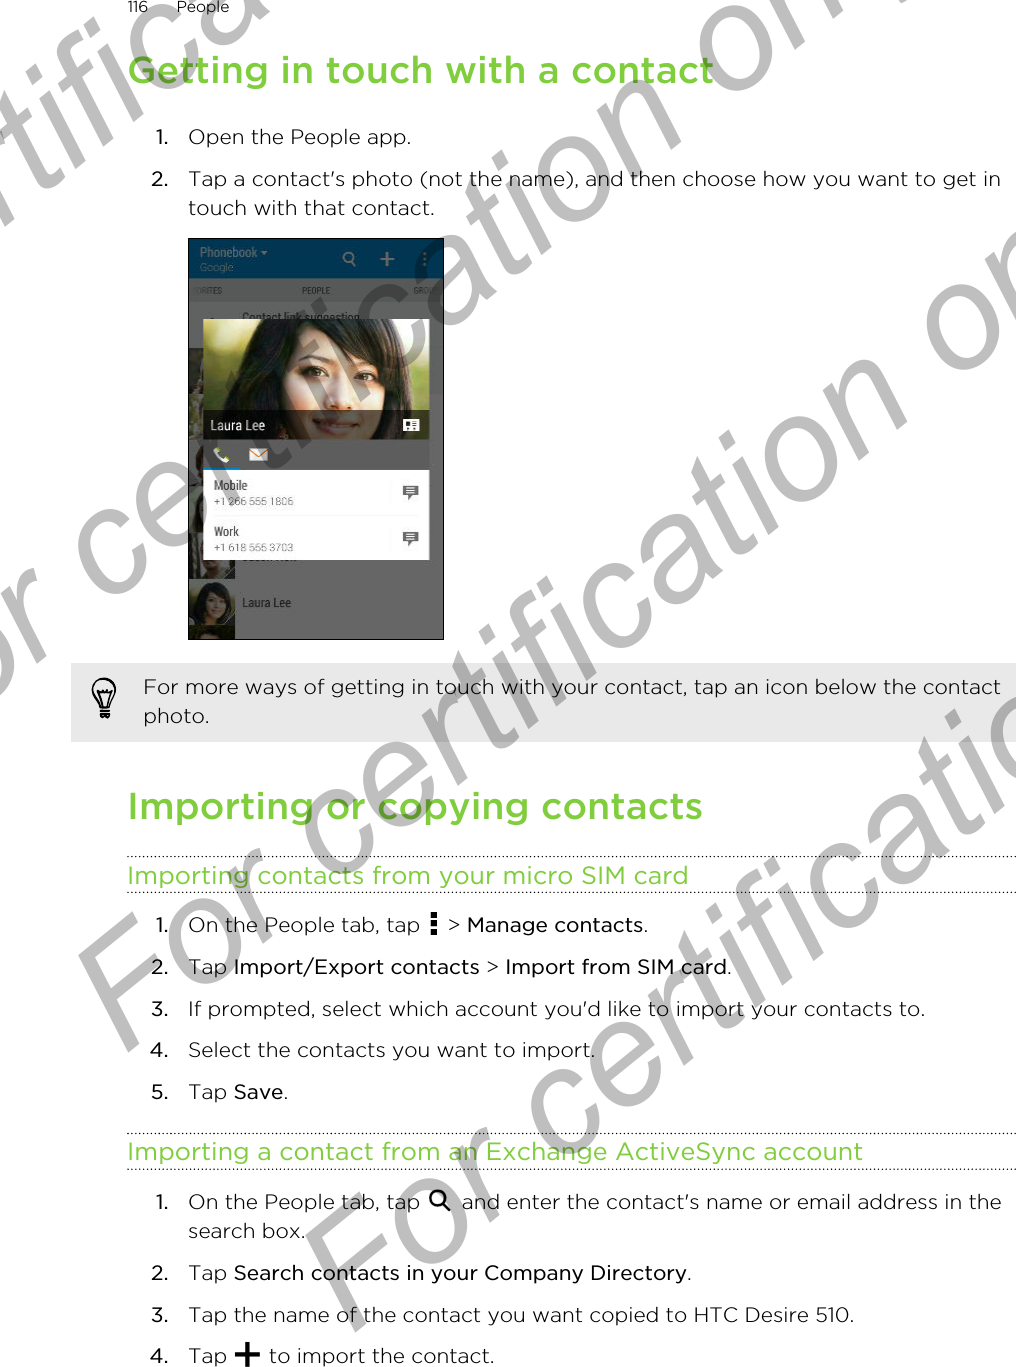 Getting in touch with a contact1. Open the People app.2. Tap a contact&apos;s photo (not the name), and then choose how you want to get intouch with that contact. For more ways of getting in touch with your contact, tap an icon below the contactphoto.Importing or copying contactsImporting contacts from your micro SIM card1. On the People tab, tap   &gt; Manage contacts.2. Tap Import/Export contacts &gt; Import from SIM card.3. If prompted, select which account you&apos;d like to import your contacts to.4. Select the contacts you want to import.5. Tap Save.Importing a contact from an Exchange ActiveSync account1. On the People tab, tap   and enter the contact&apos;s name or email address in thesearch box.2. Tap Search contacts in your Company Directory.3. Tap the name of the contact you want copied to HTC Desire 510.4. Tap   to import the contact.116 PeopleFor certification only  For certification only  For certification only  For certification only 